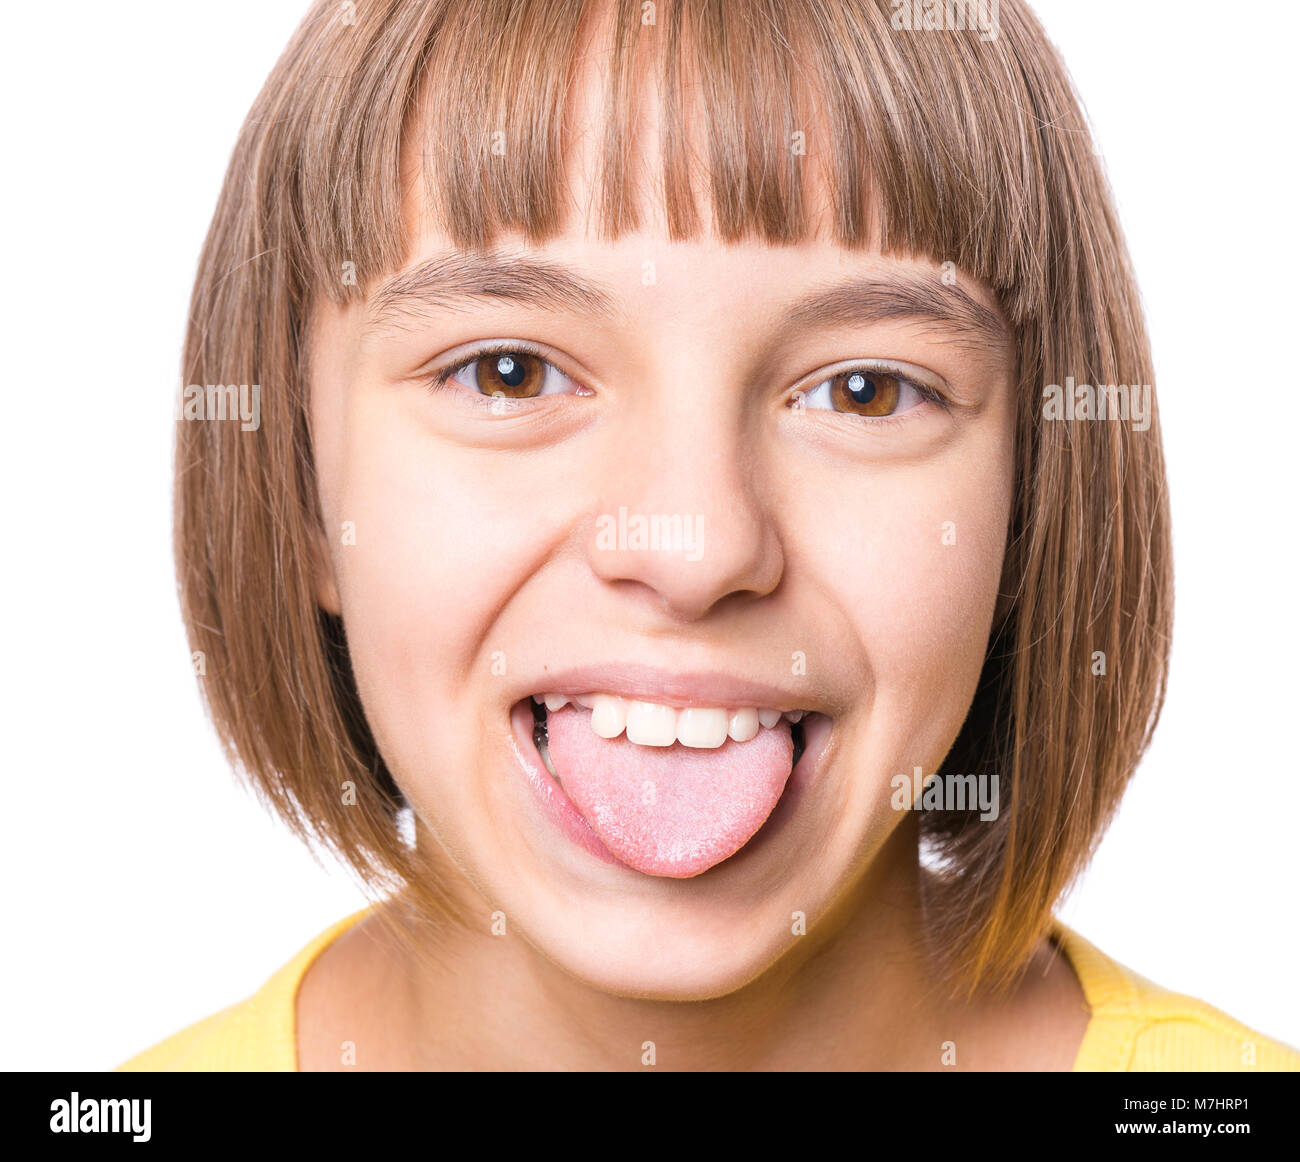 Girl showing her tongue Stock Photo